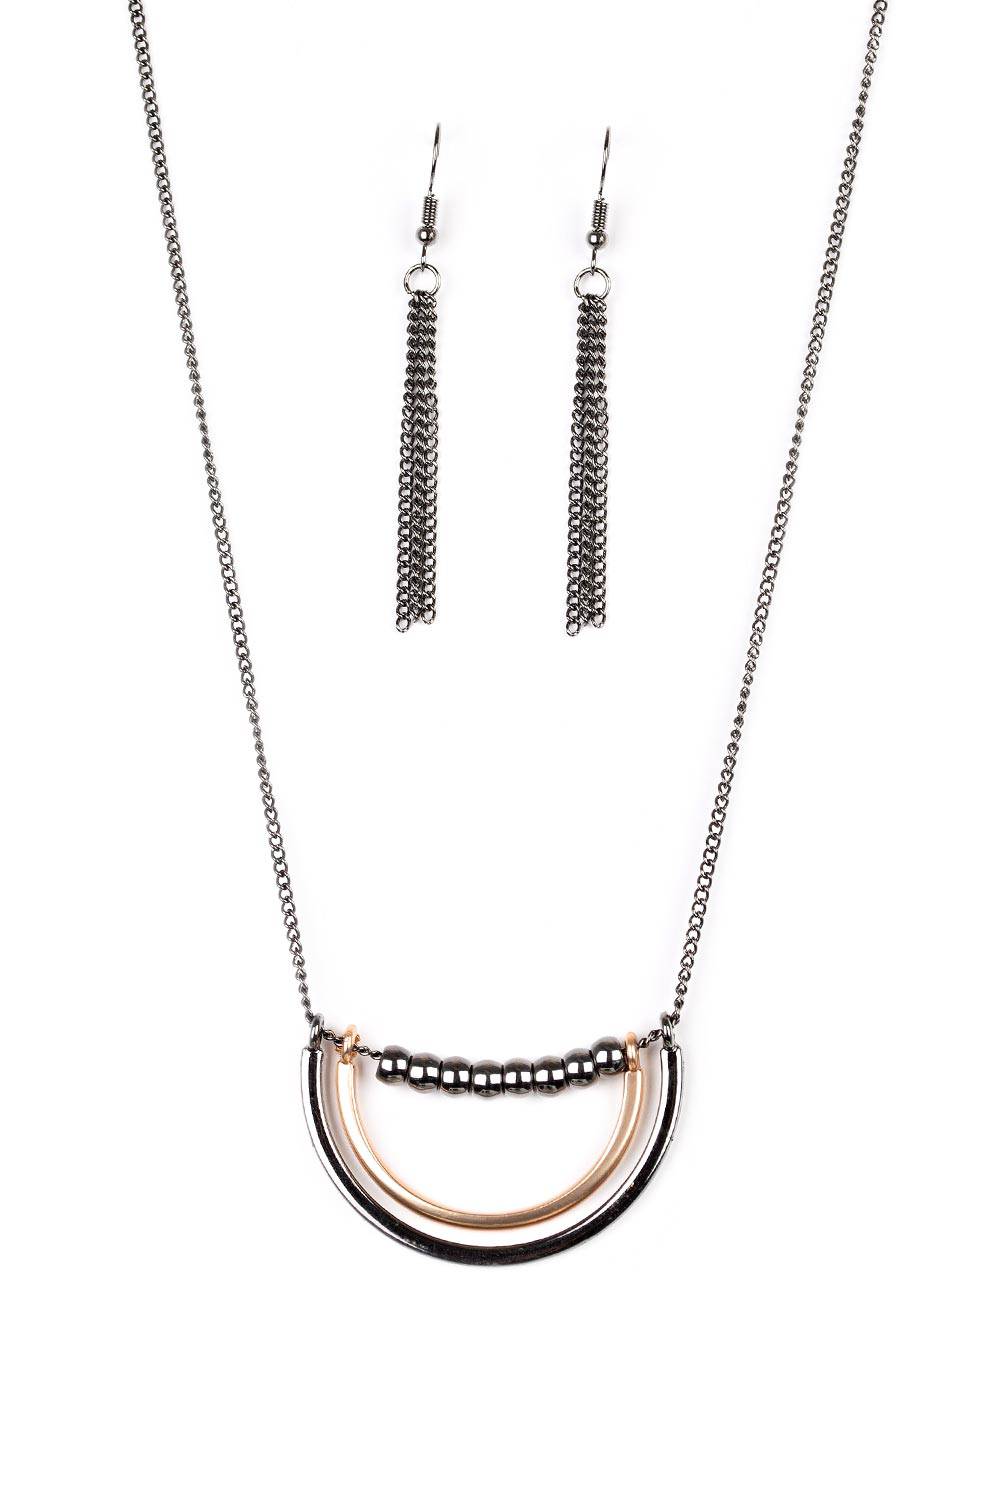 A117 - Artificial Arches Necklace in Black or Silver by Paparazzi Accessories on Fancy5Fashion.com